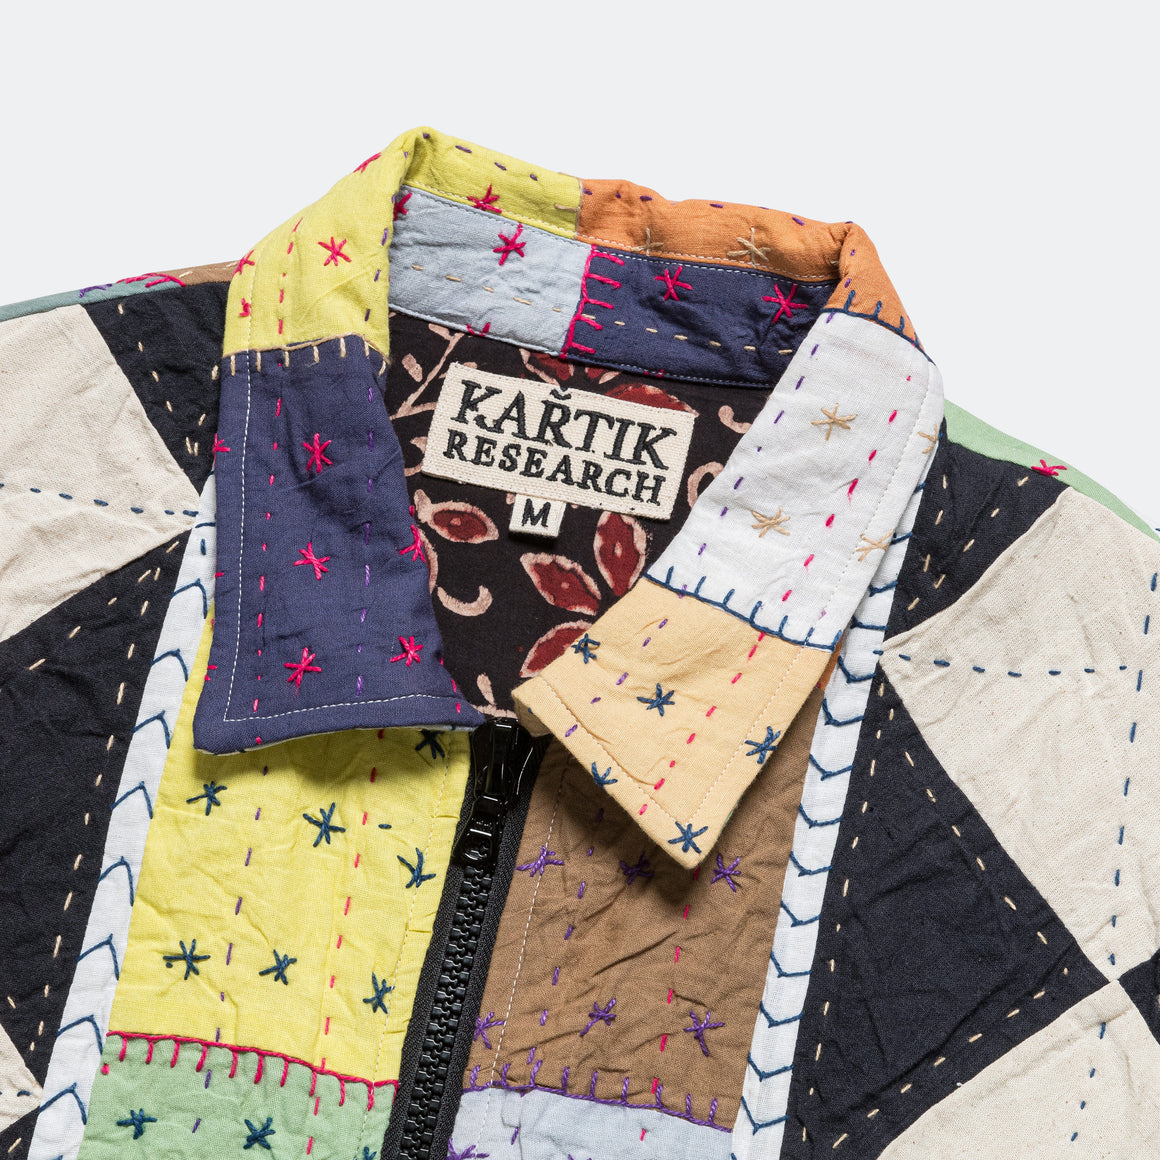 Kartik Research - Zip Work Jacket Hand Quilted - White/Brown-Multicolour - UP THERE